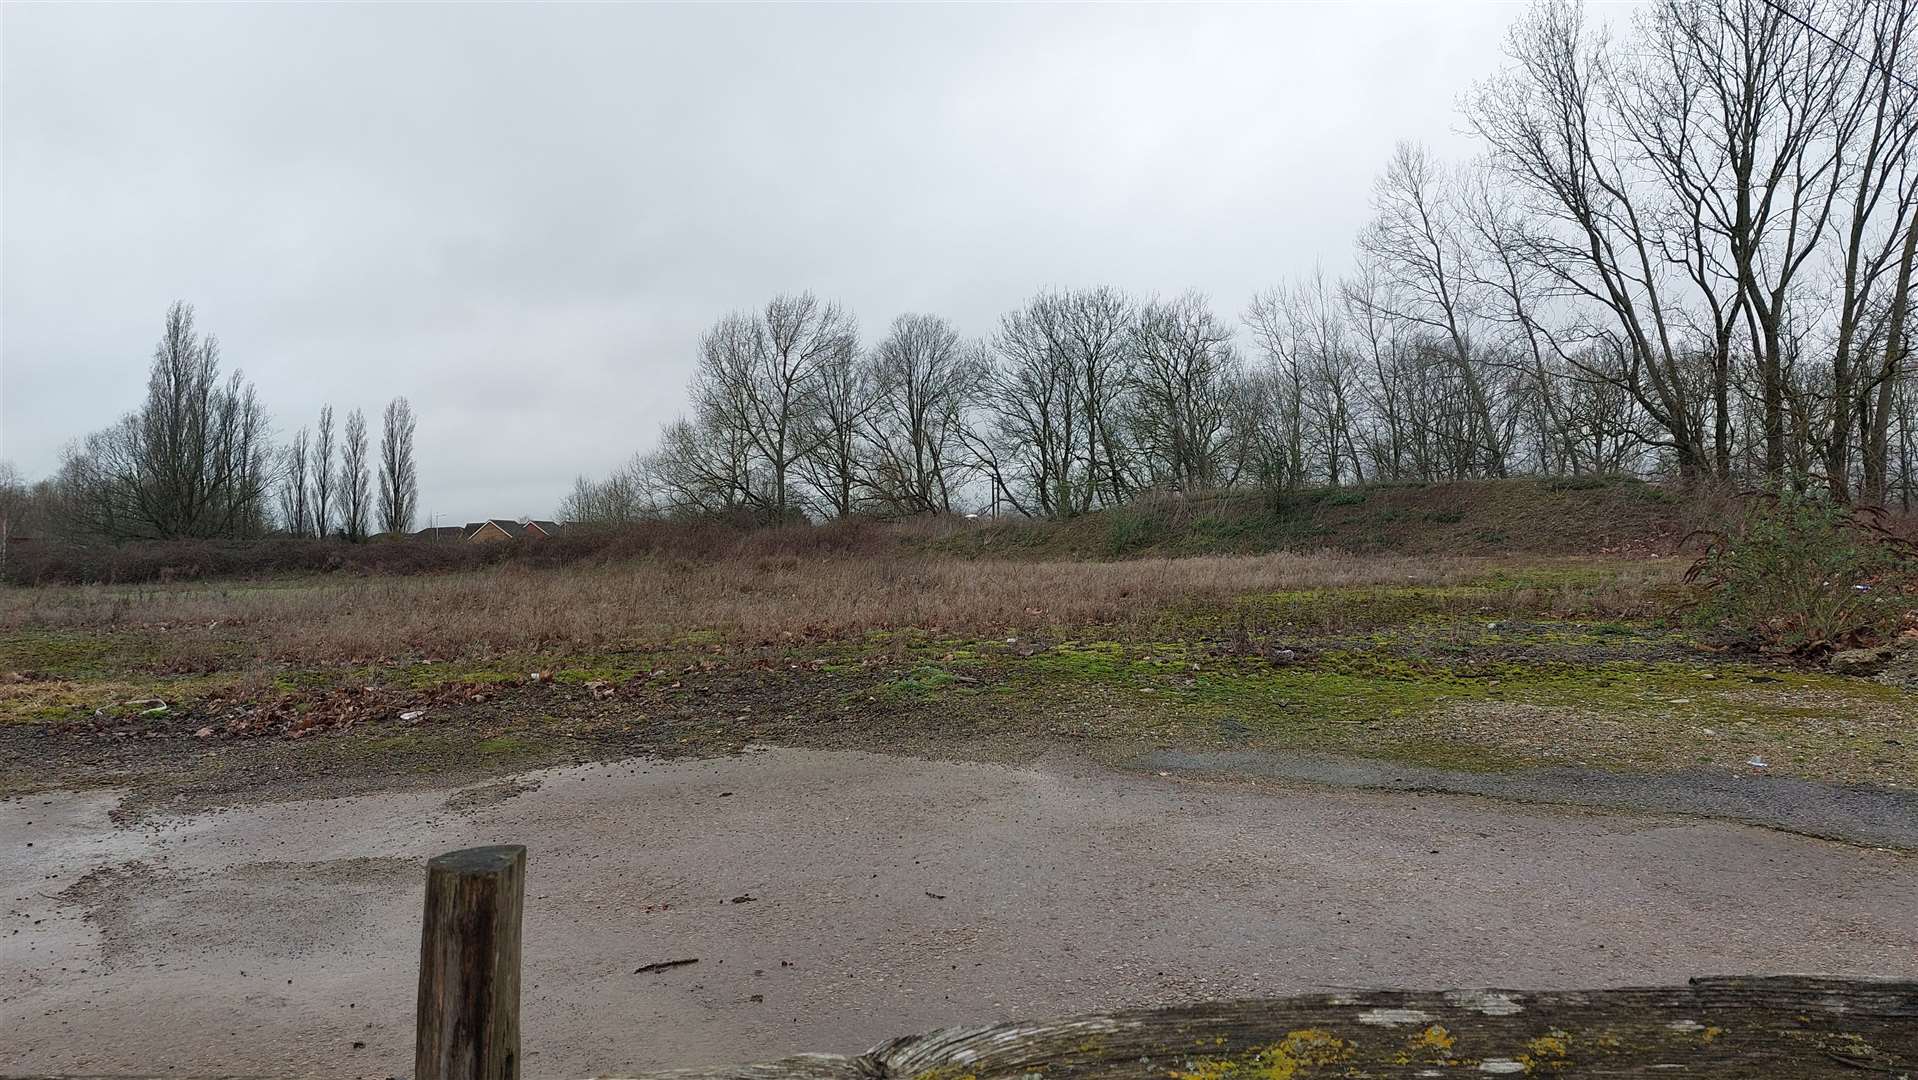 The land set for 170 more homes is currently sat empty